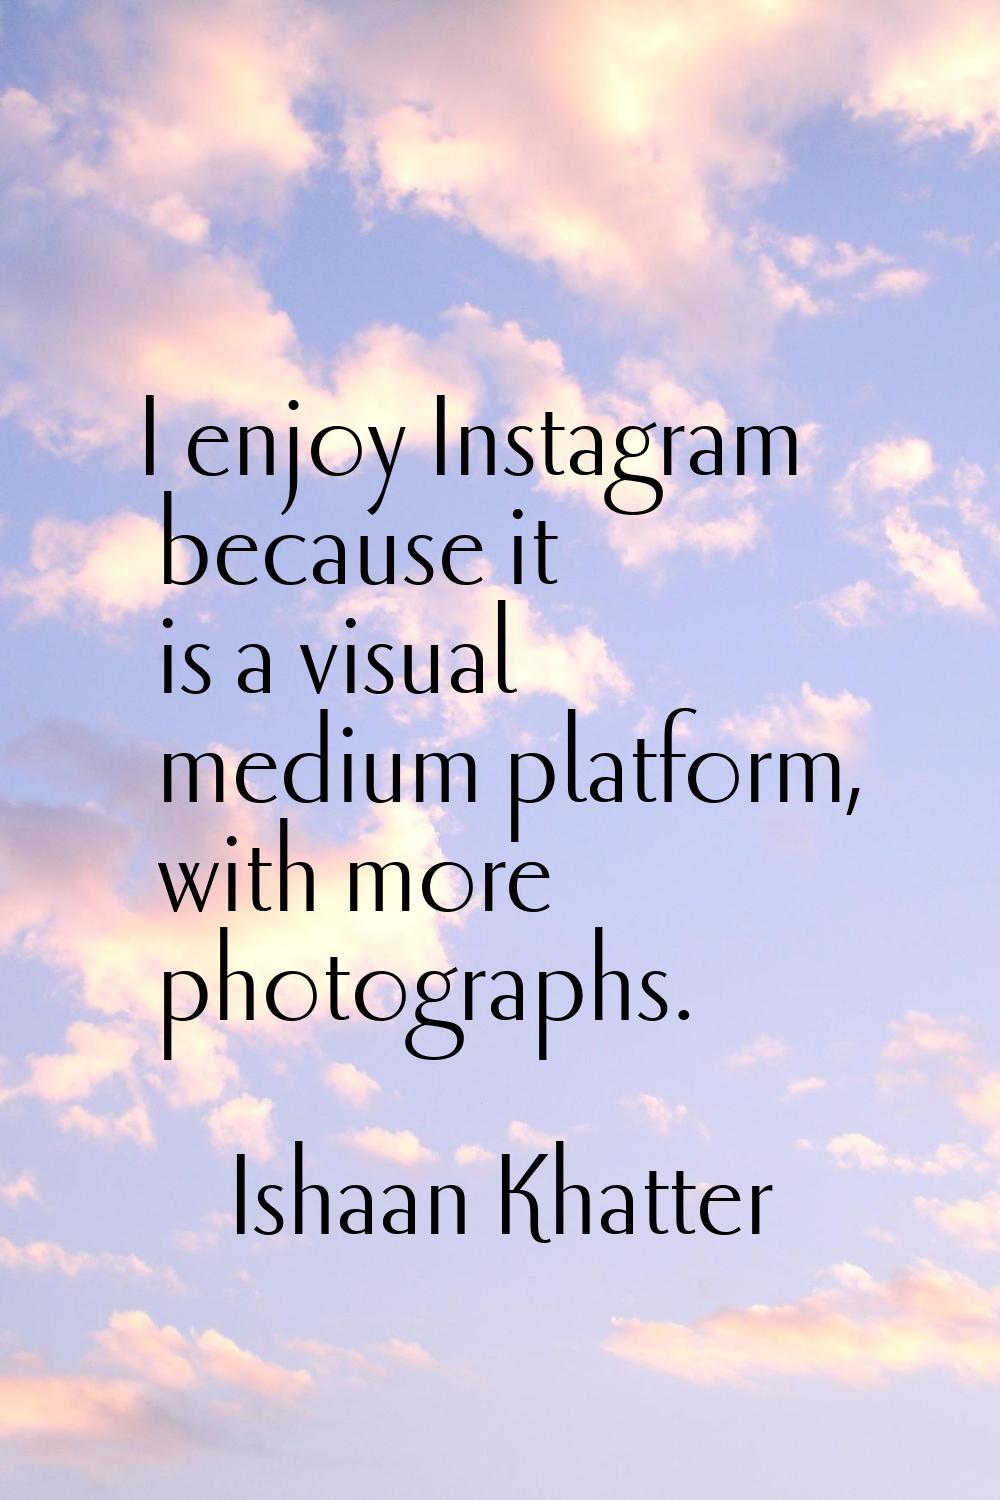 I enjoy Instagram because it is a visual medium platform, with more photographs.